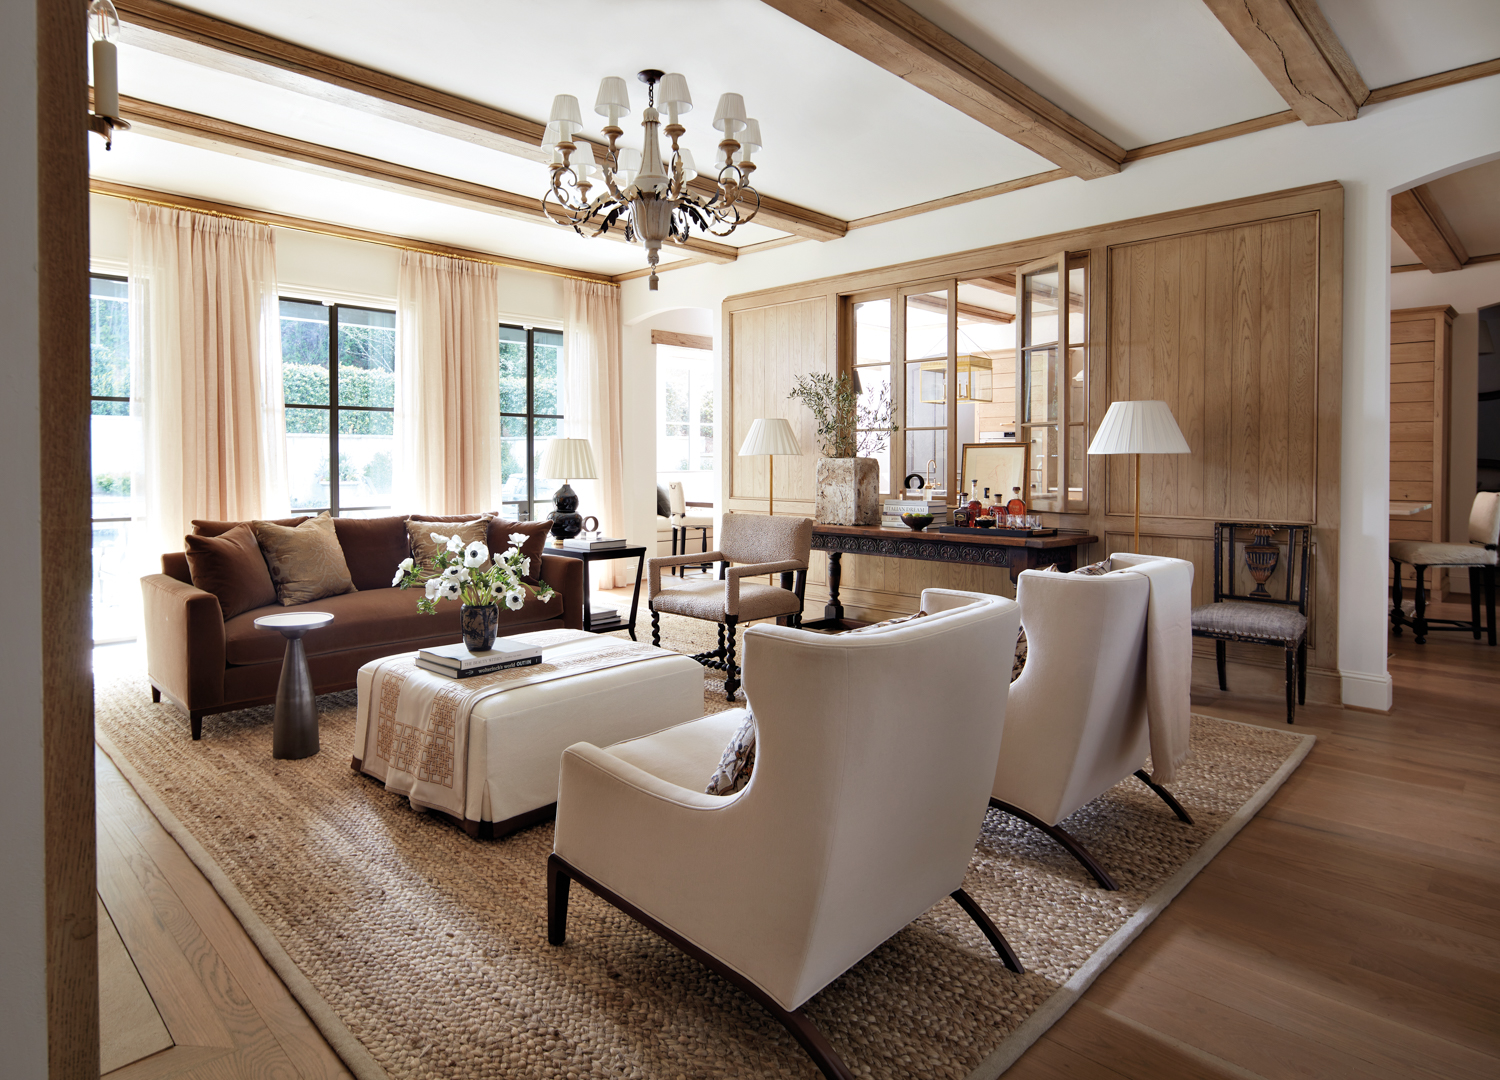 A serene living room with sleek wing chairs and a neutral palette